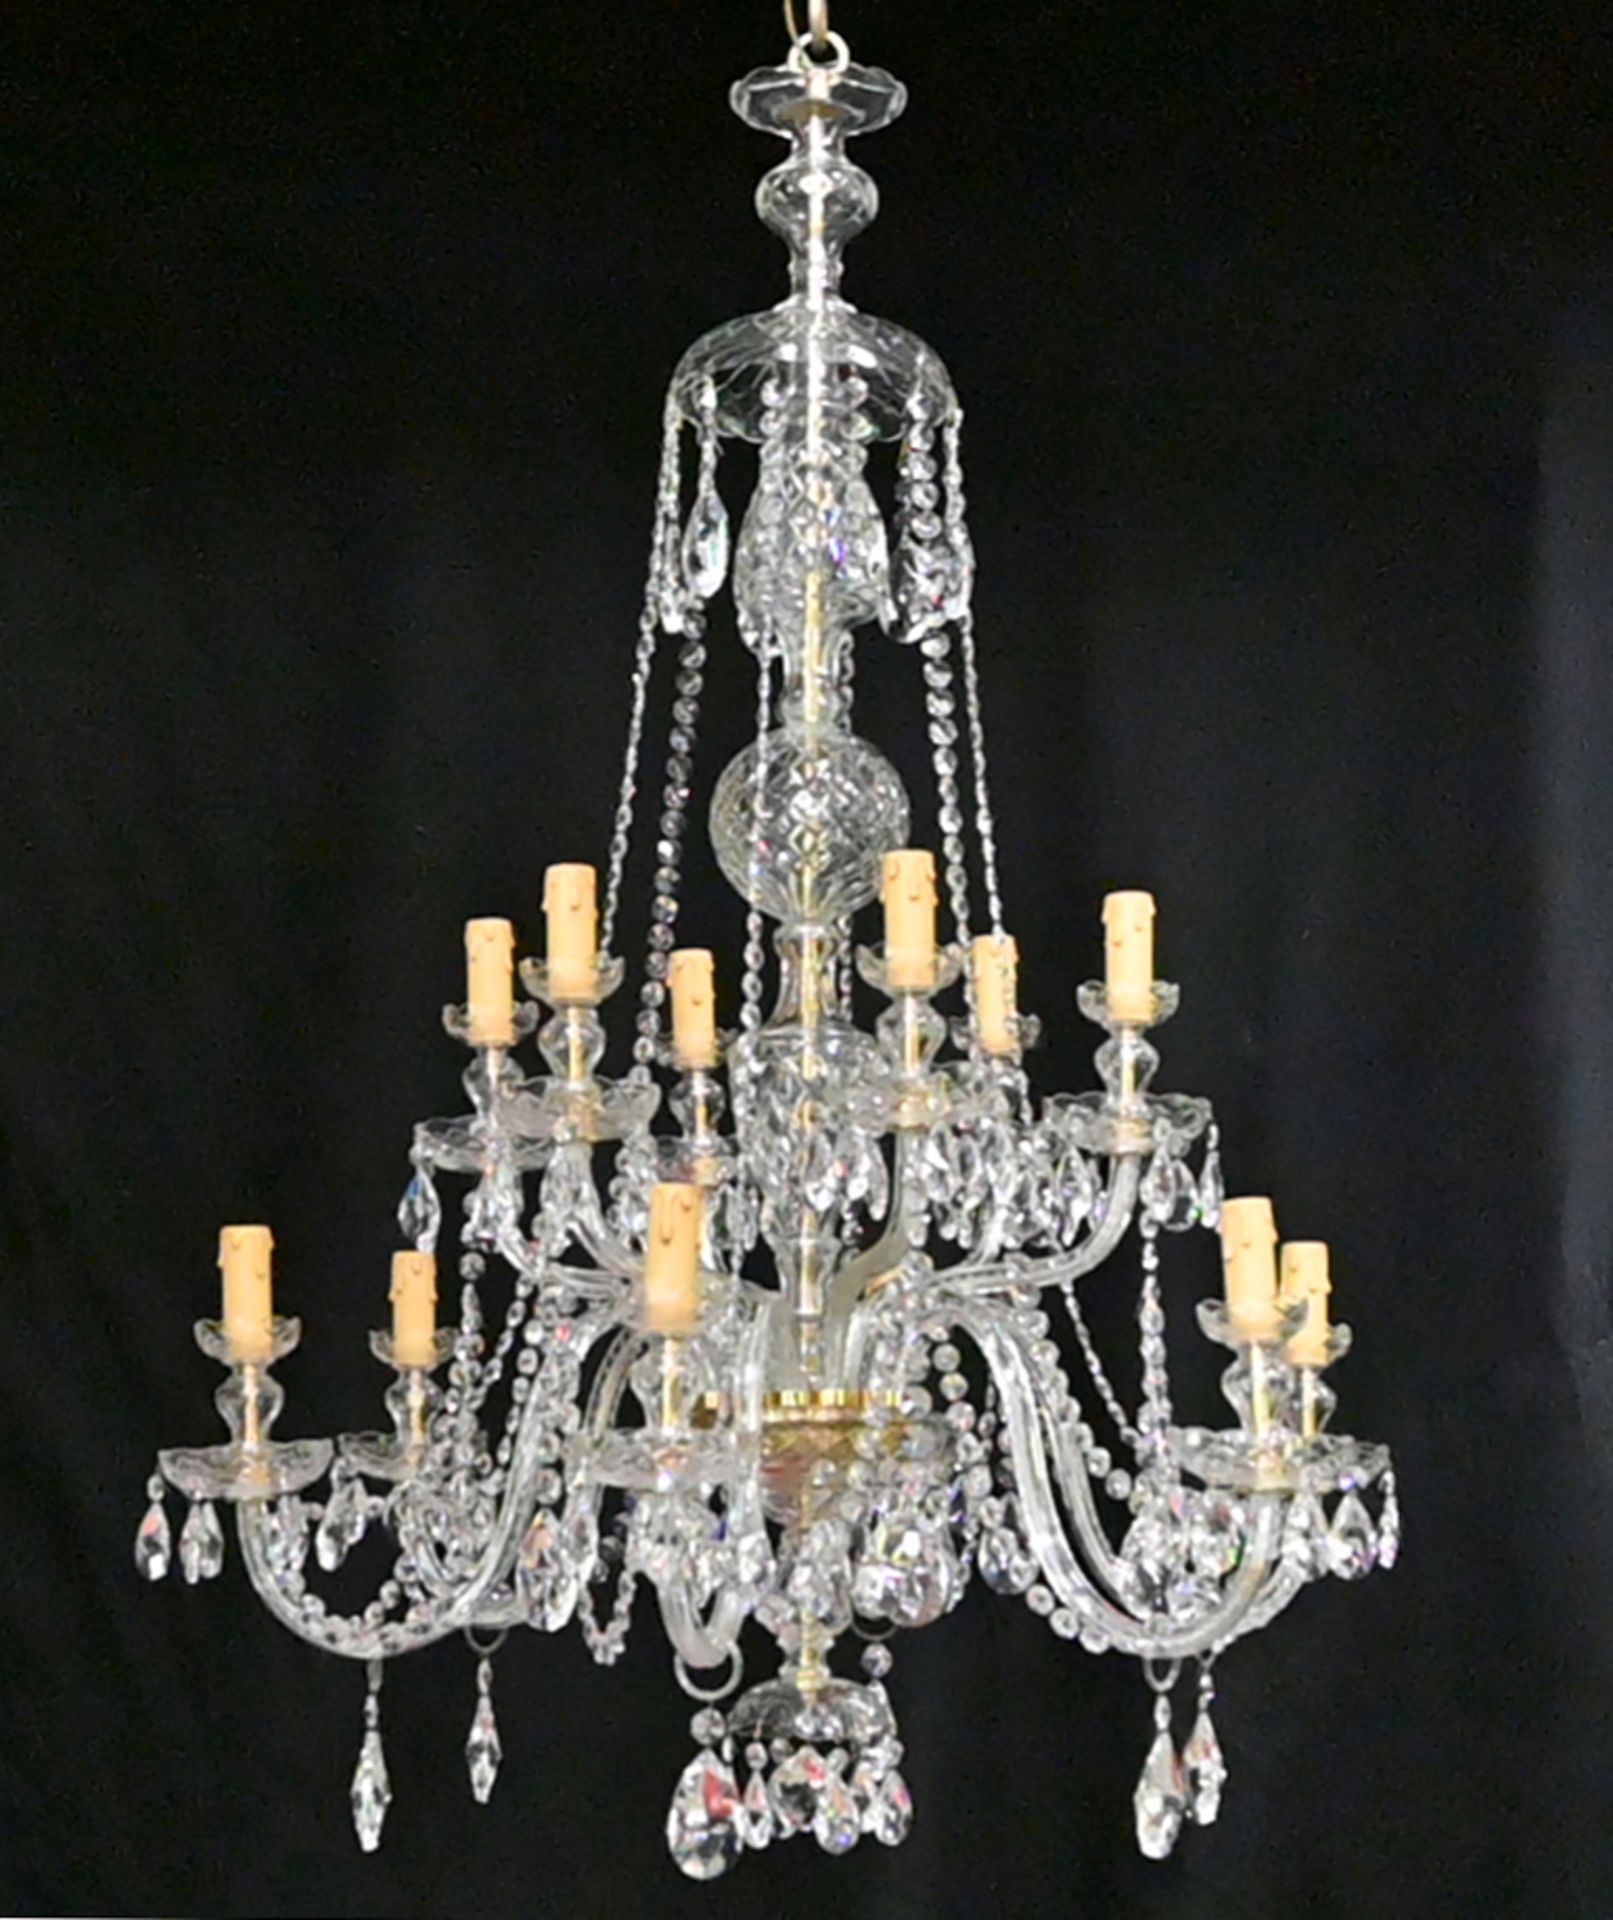 Chandelier 12 Light Bohemian Chandelier With Swarovski Crystal This Is A Superb Example Of This